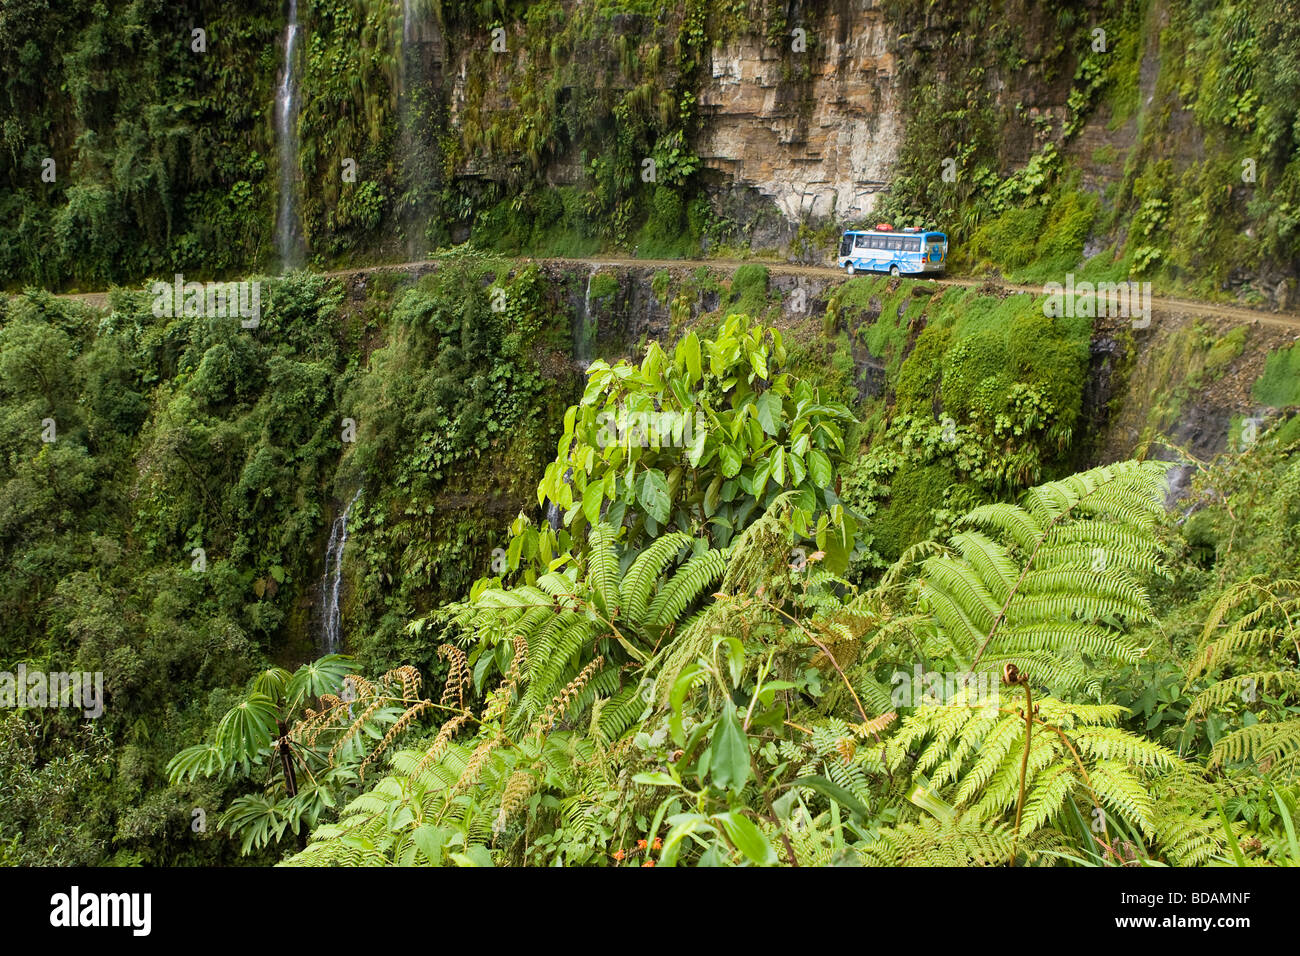 Vehicle traveling the road from La Paz to Coroico, Bolivia. Stock Photo